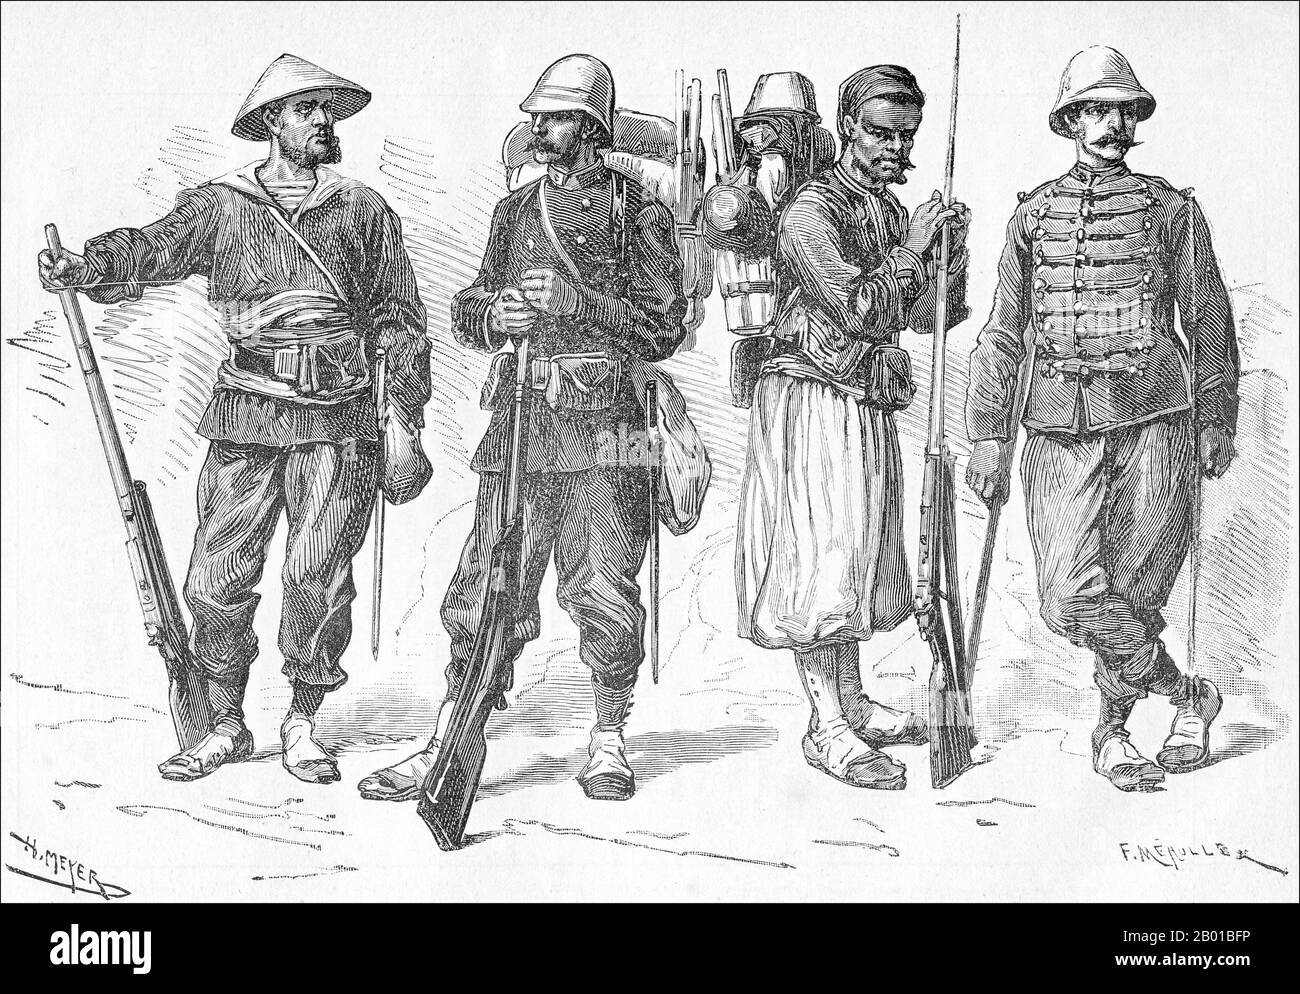 Vietnam/France: Tonkin Campaign - Uniforms of the Tonkin expeditionary corps in 1885 (fusilier-marin, marine infantryman, Turco and marine artilleryman). Lithograph, 1886.  The Tonkin Campaign (French: Campagne du Tonkin) was an armed conflict fought between June 1883 and April 1886 by the French against, variously, the Vietnamese, Liu Yongfu's Black Flag Army and the Chinese Guangxi and Yunnan armies to occupy Tonkin (northern Vietnam) and entrench a French protectorate there. Stock Photo